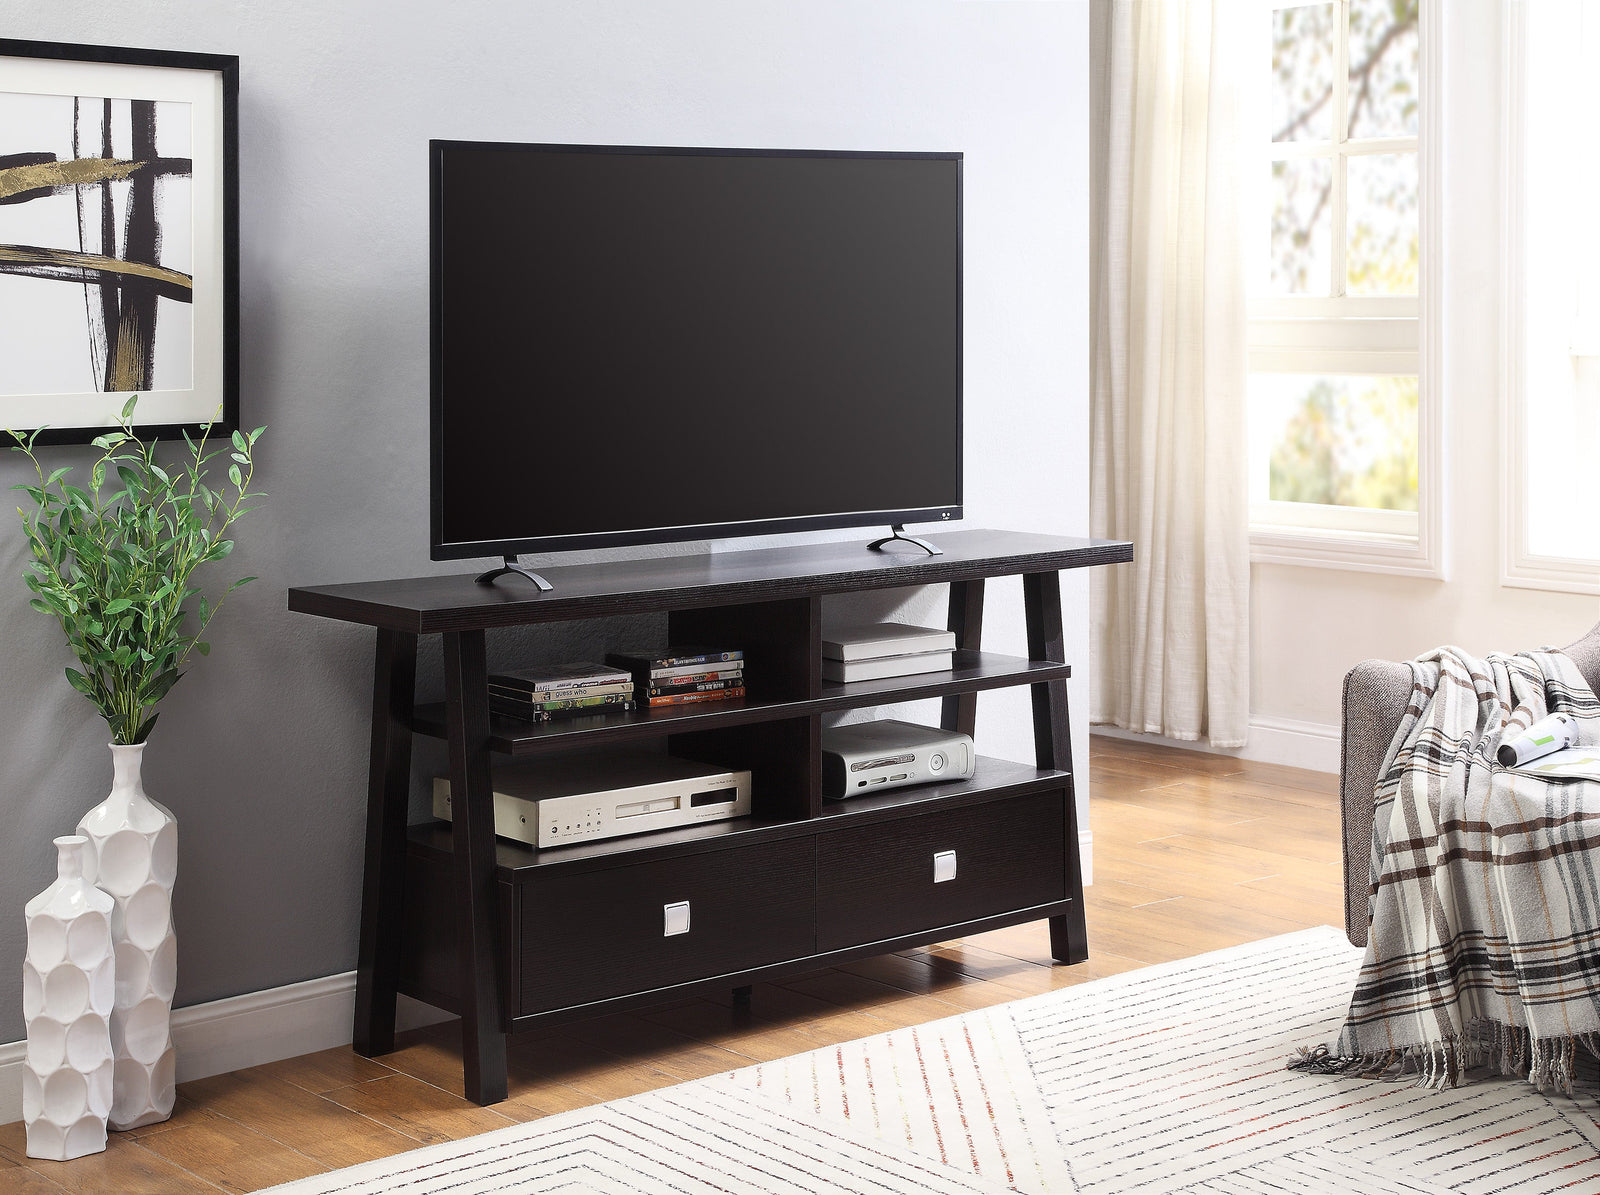 Jarvis Sleek And Modern Dark Brown Tv Stand Assembled Drawers, Media Consoles, Entertainment Cabinets, Angled Legs And Metal Drawer with Storage Doors for Living Room